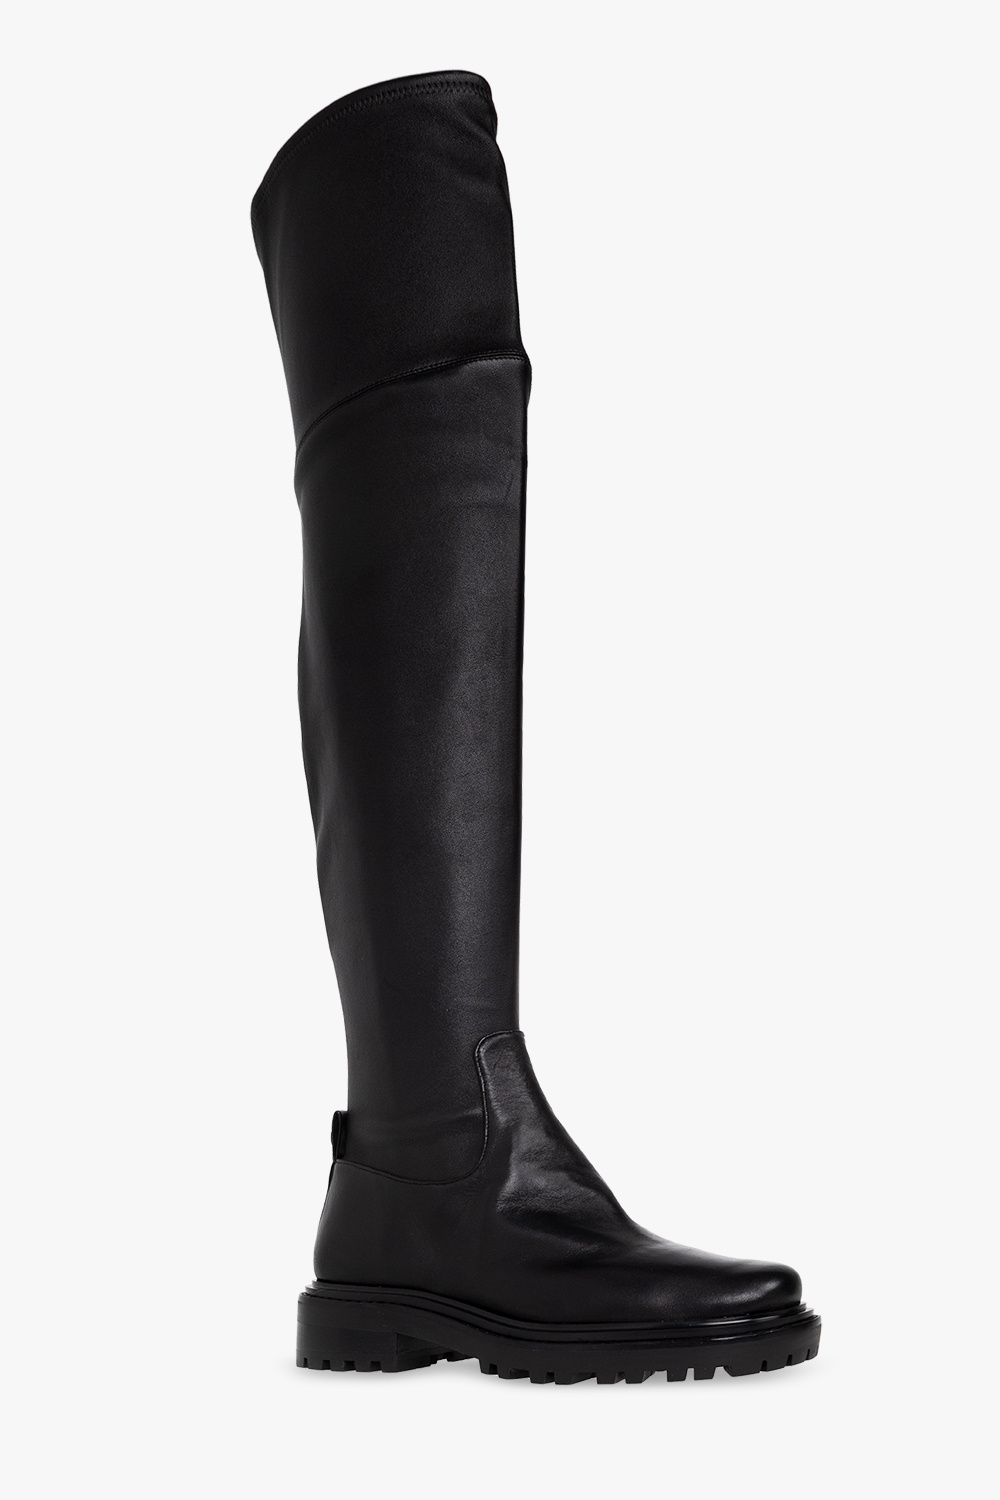 Tory Burch 'Utlility Lug' over-the-knee boots | Women's Shoes | Vitkac